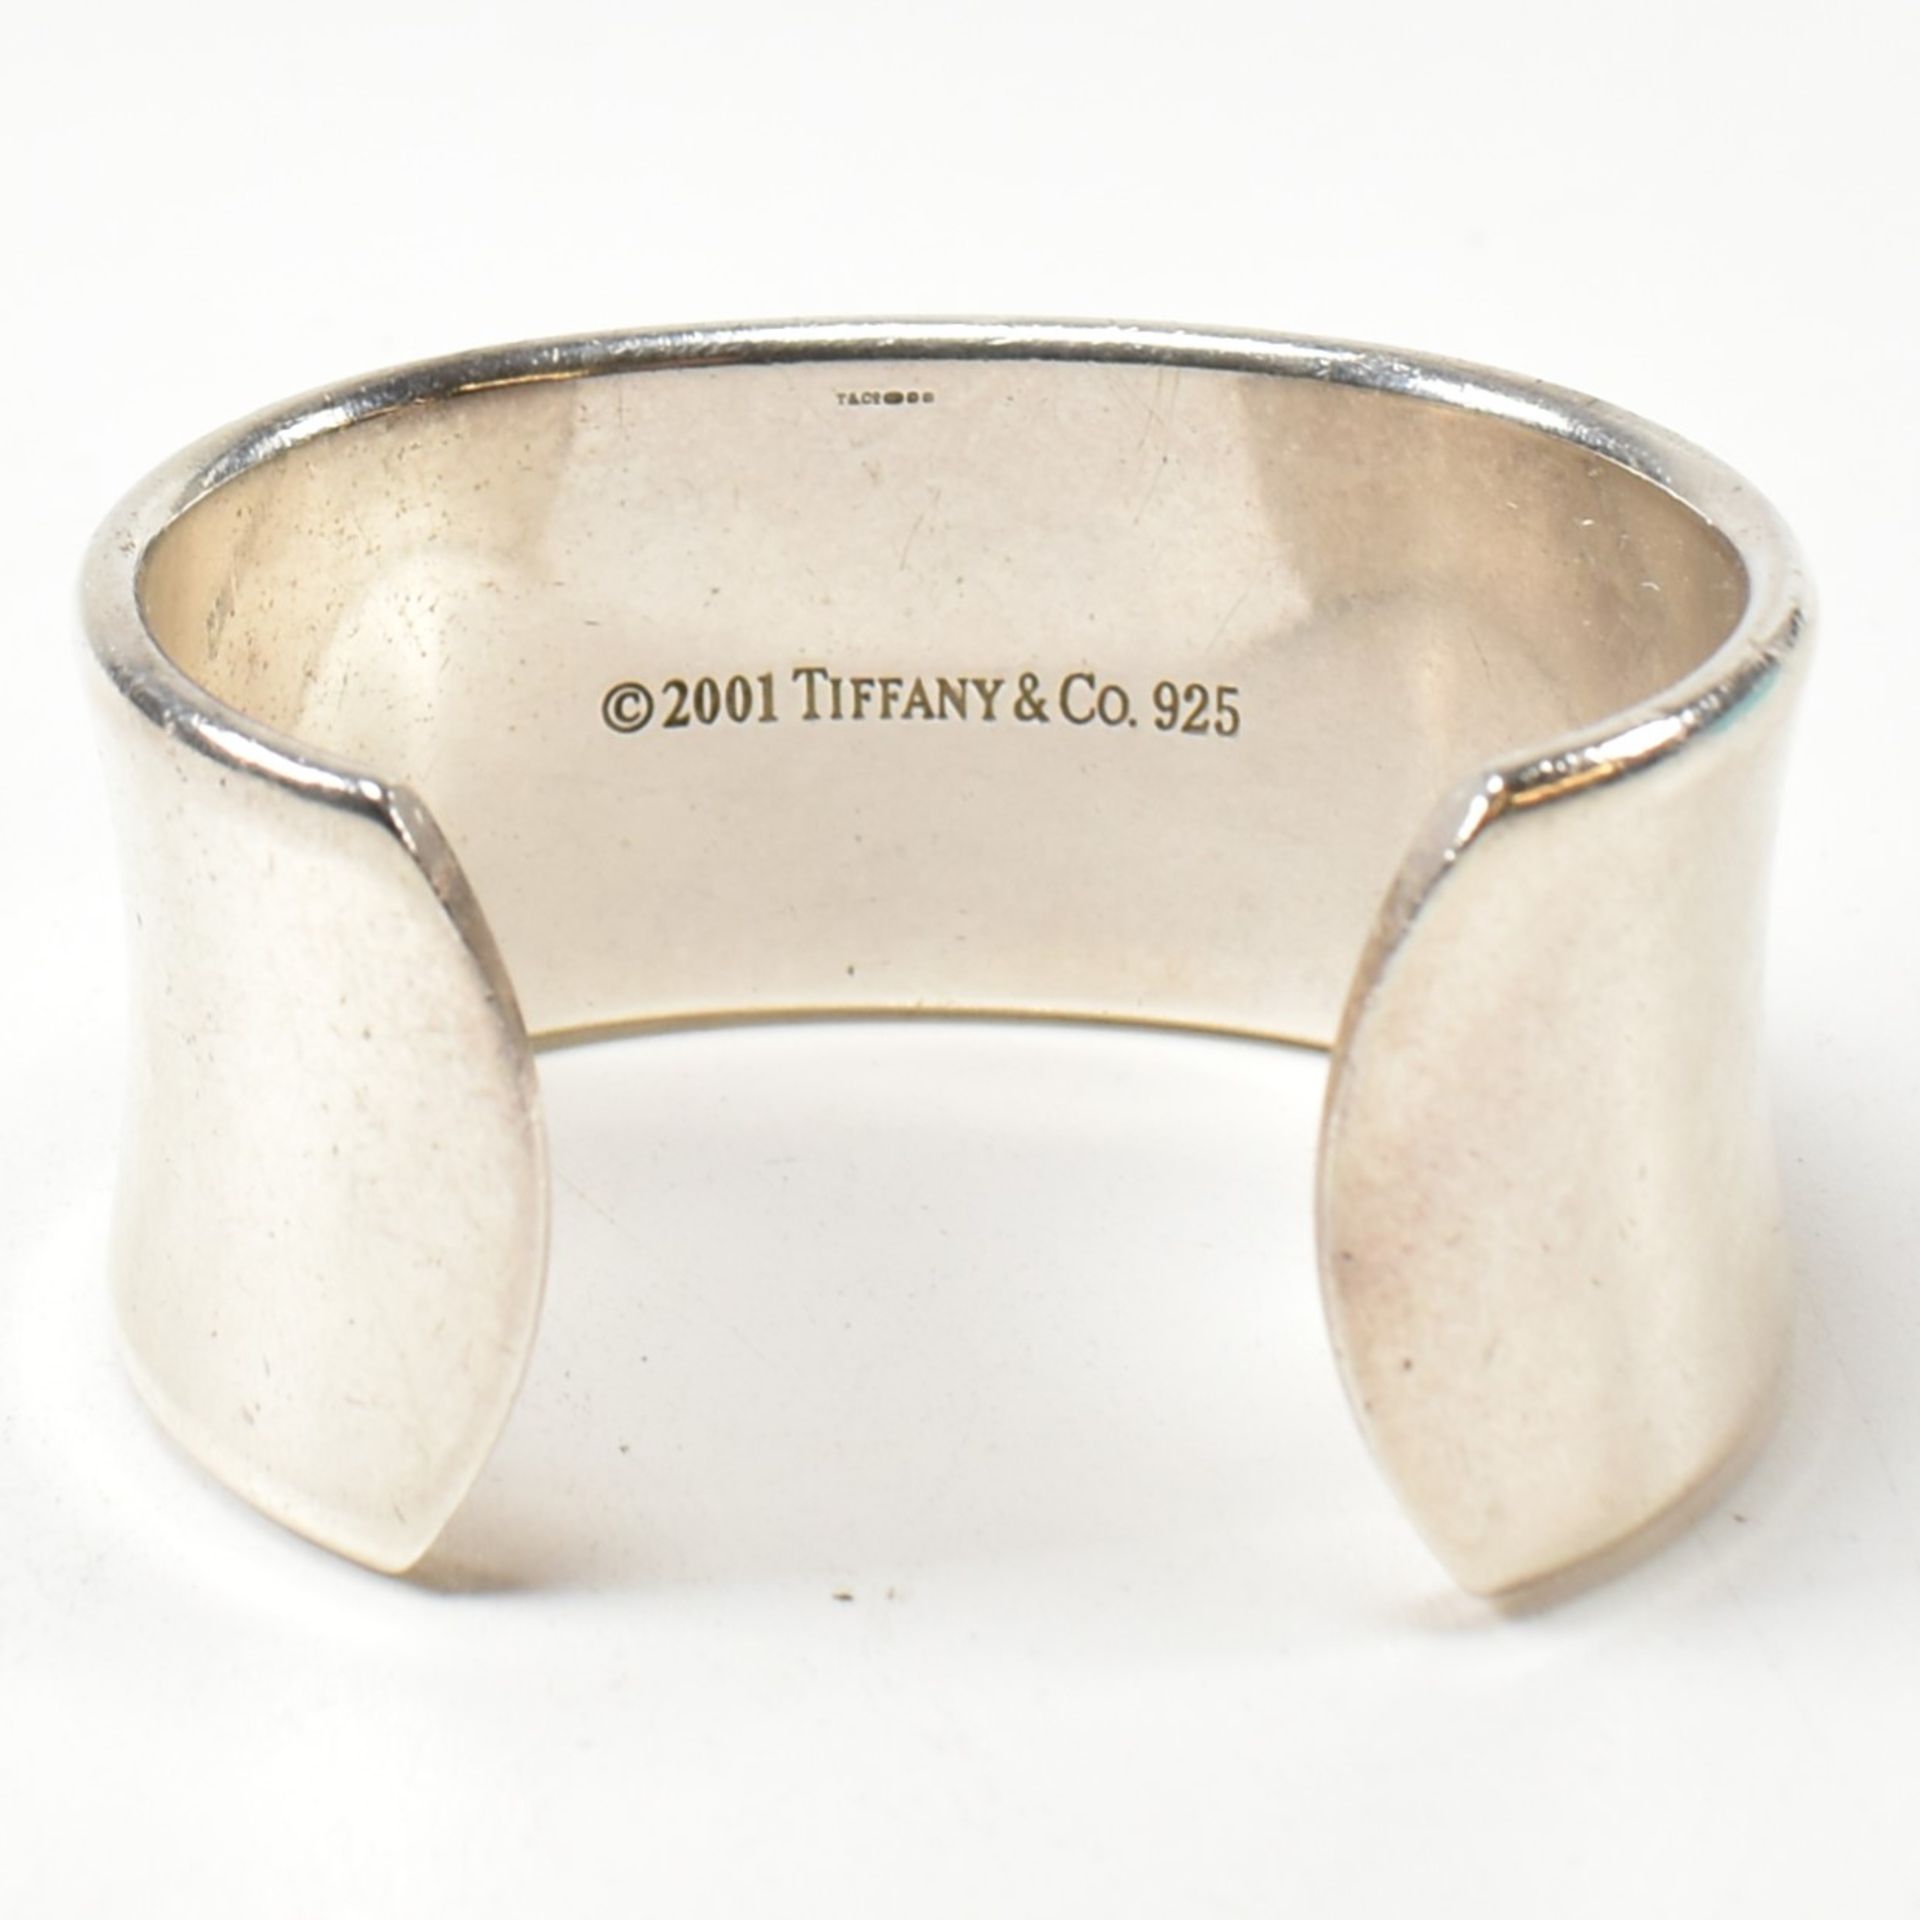 TIFFANY & CO 1837 STERLING SILVER WIDE CUFF BANGLE - Image 3 of 7